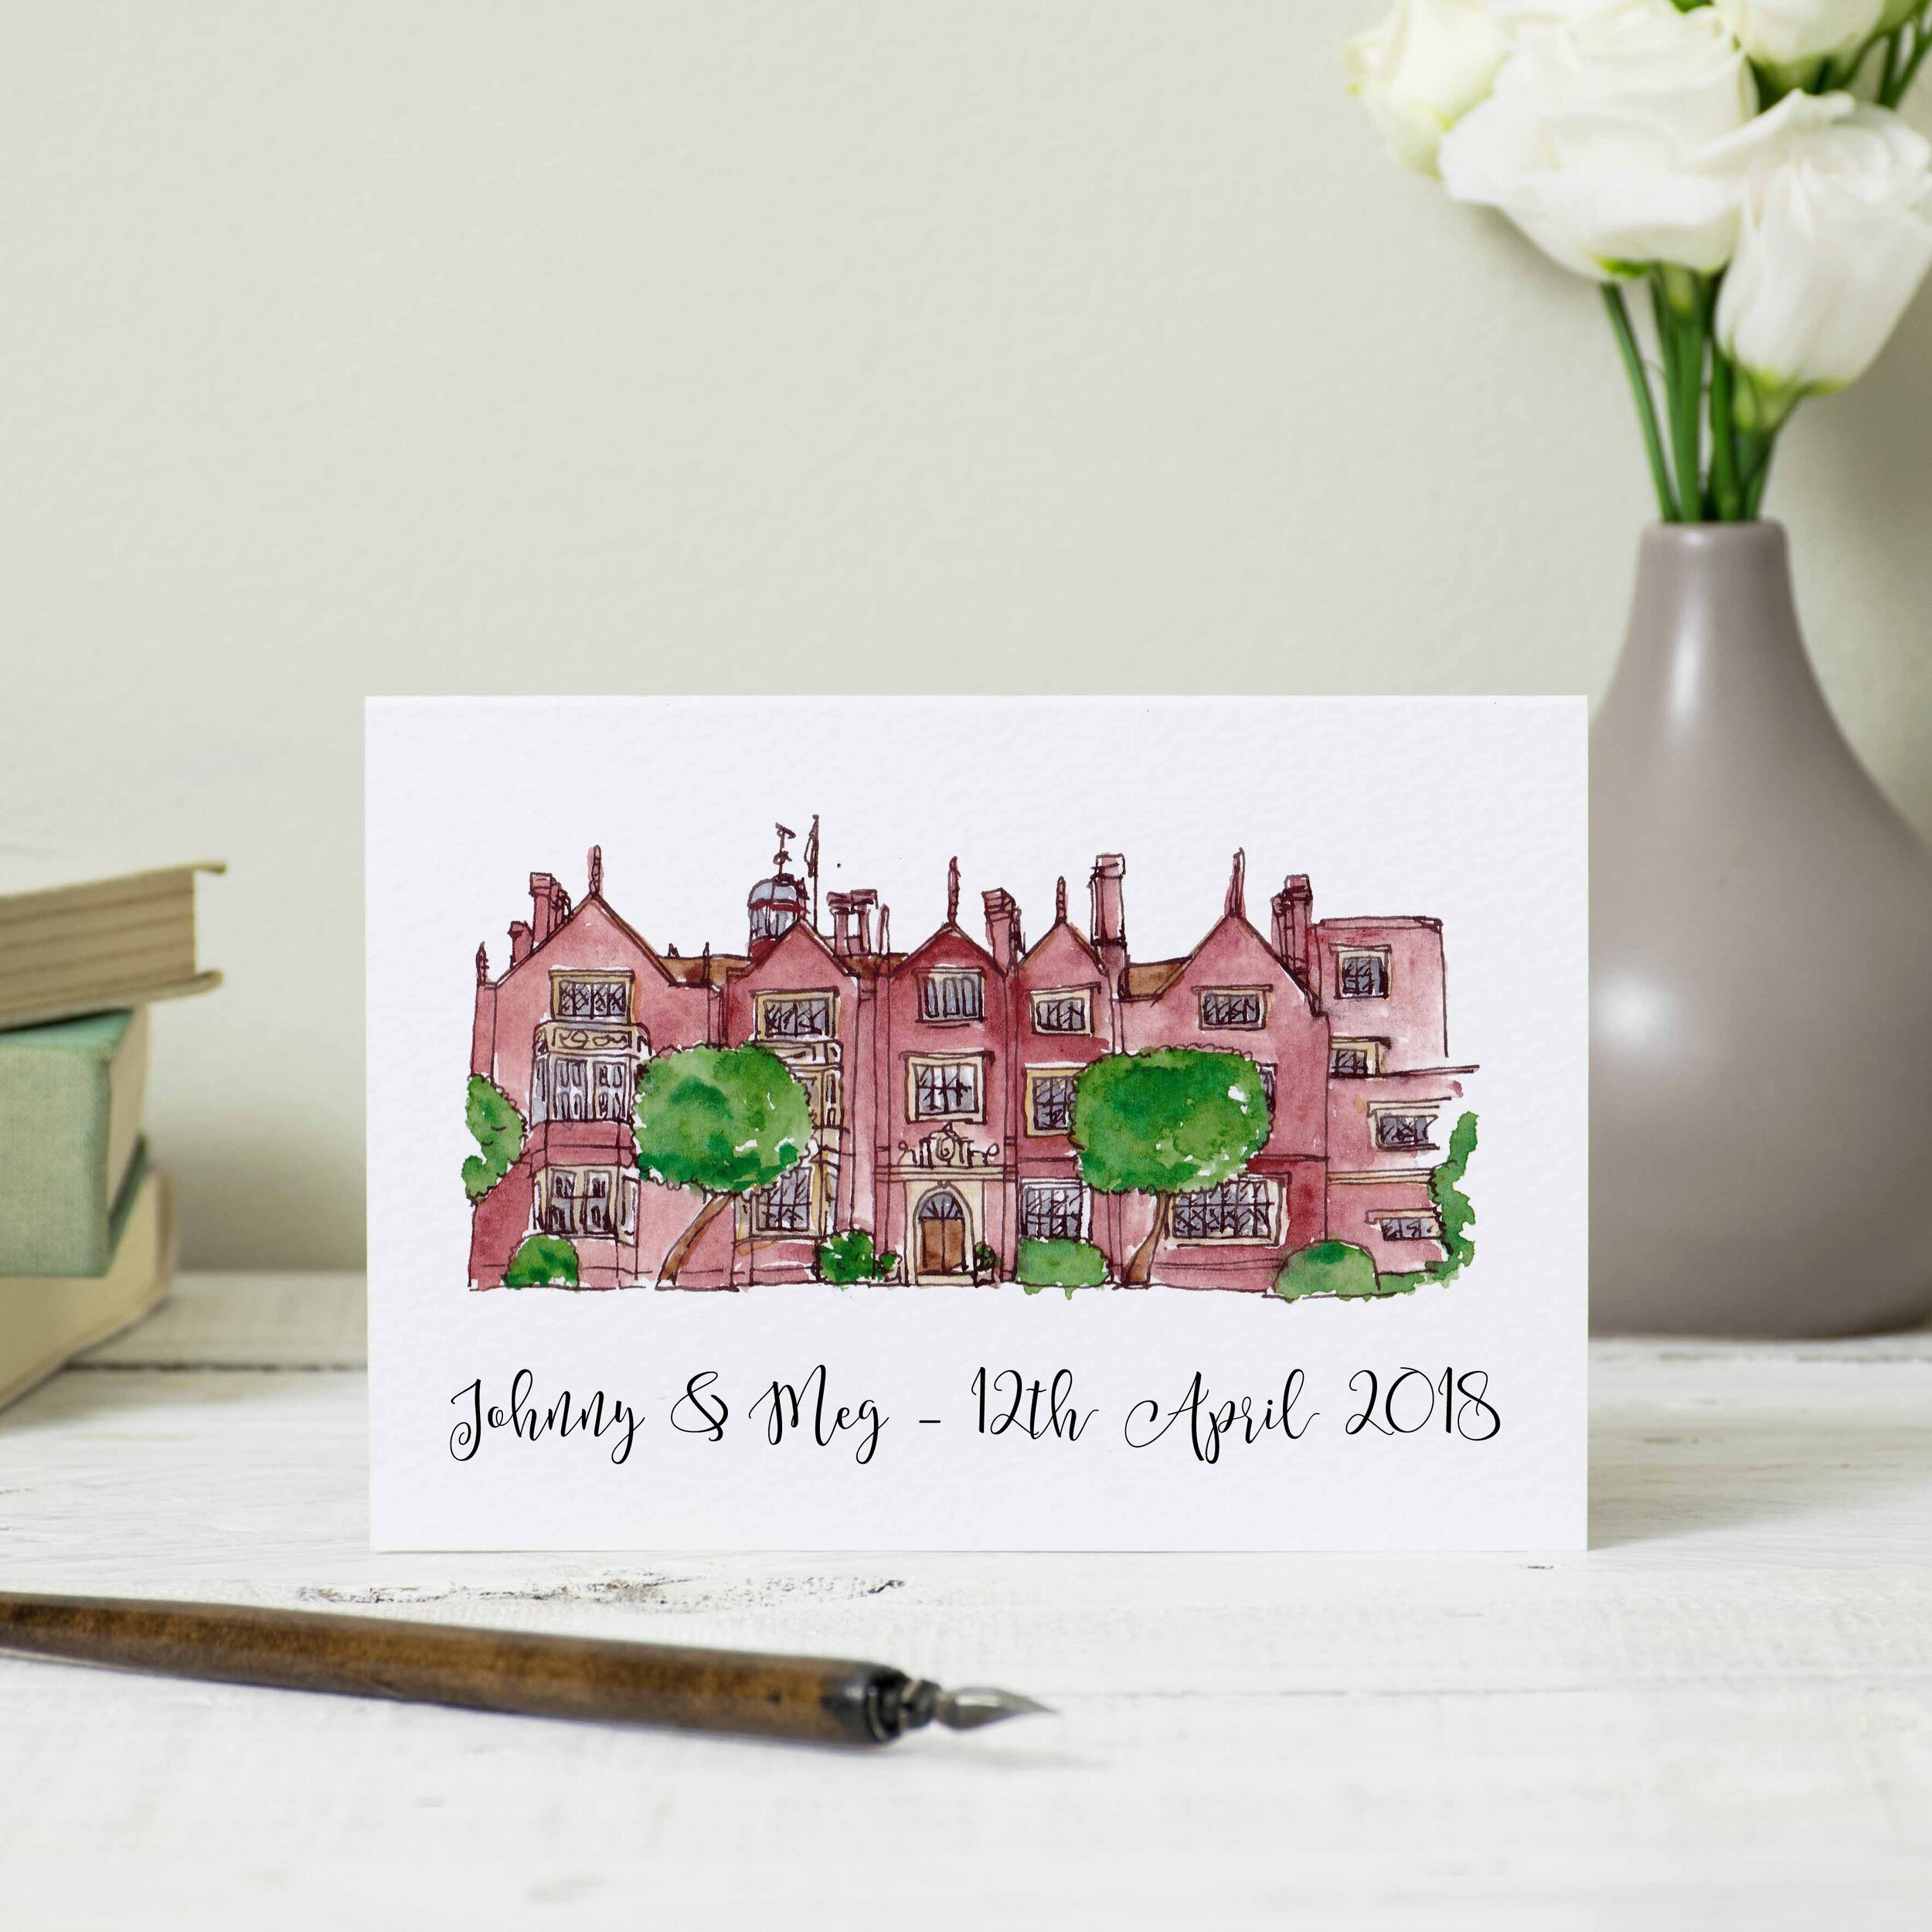 wedding venue thank you cards jen russell-smith.jpg